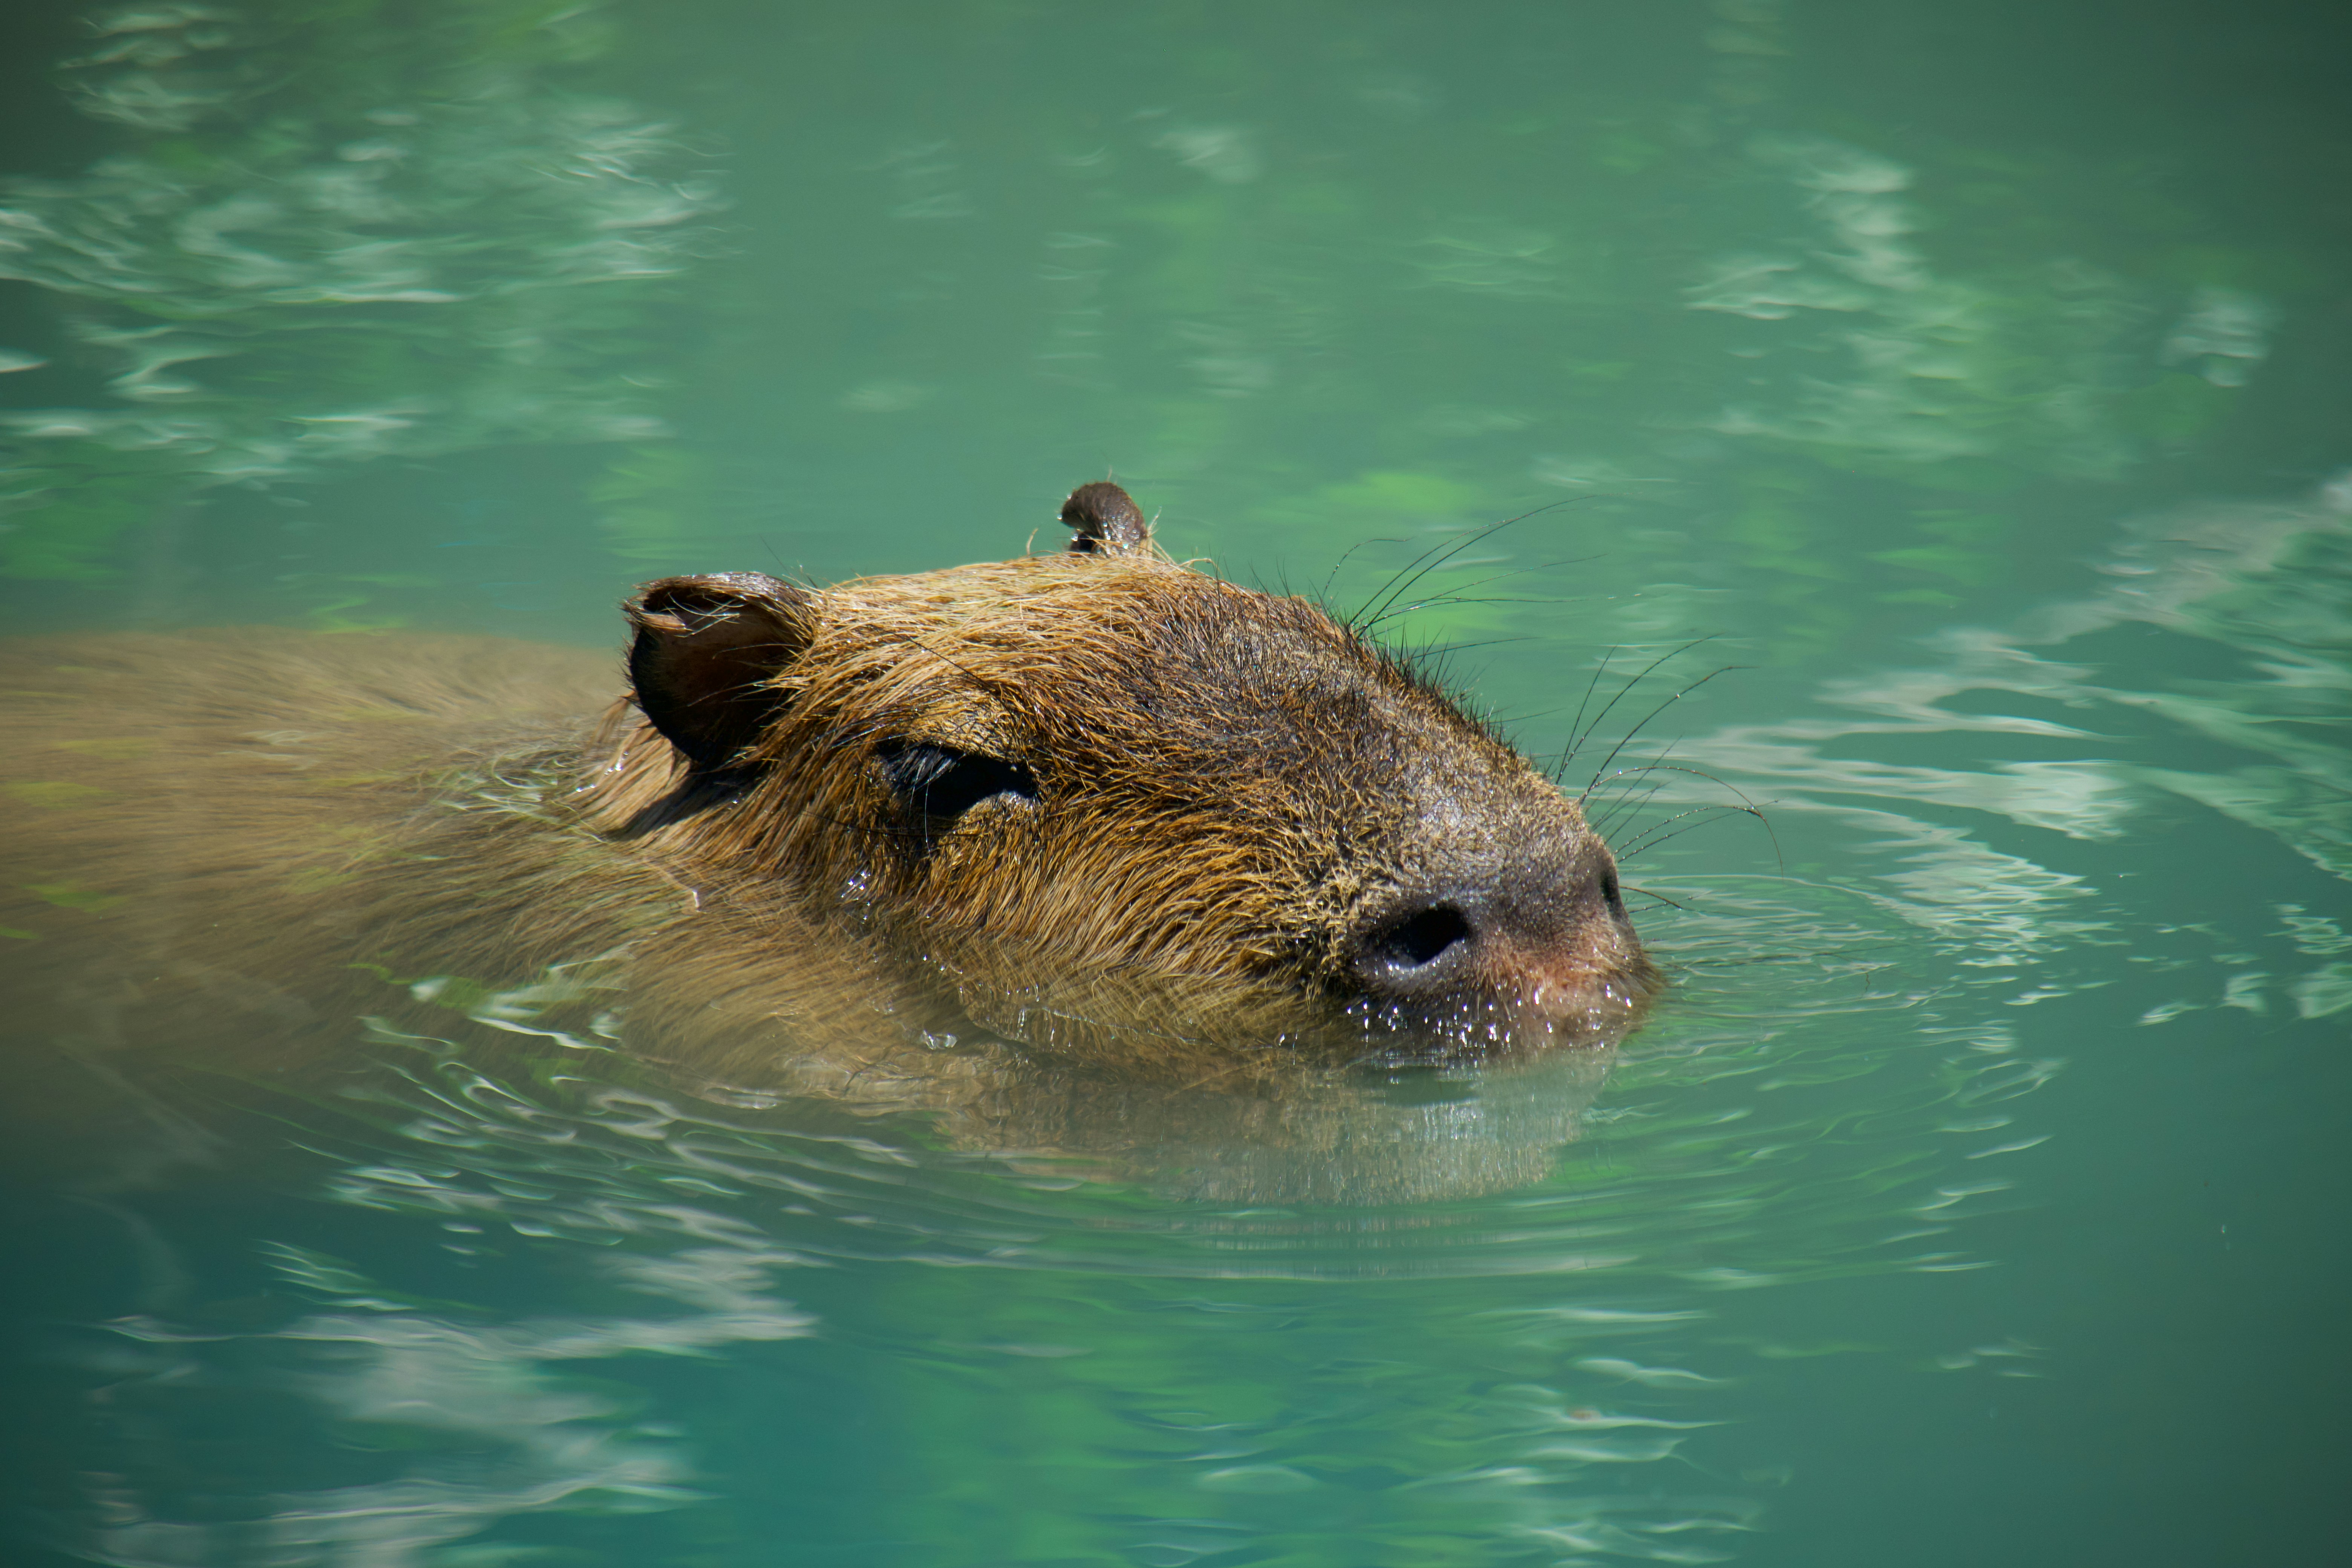 Where to Buy a Capybara in the UK